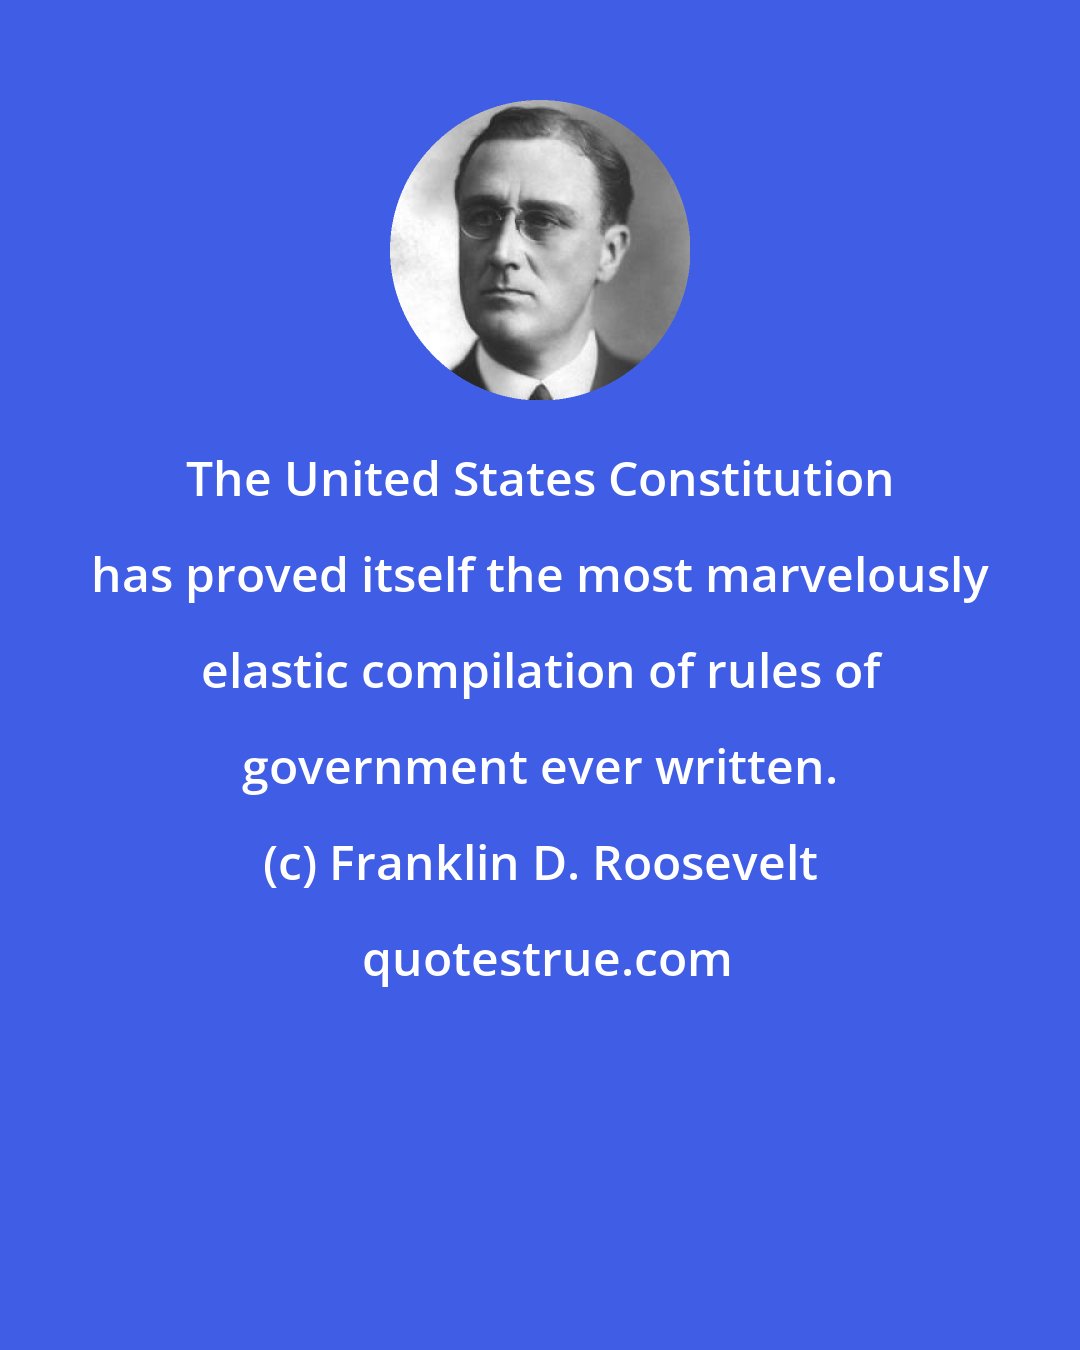 Franklin D. Roosevelt: The United States Constitution has proved itself the most marvelously elastic compilation of rules of government ever written.